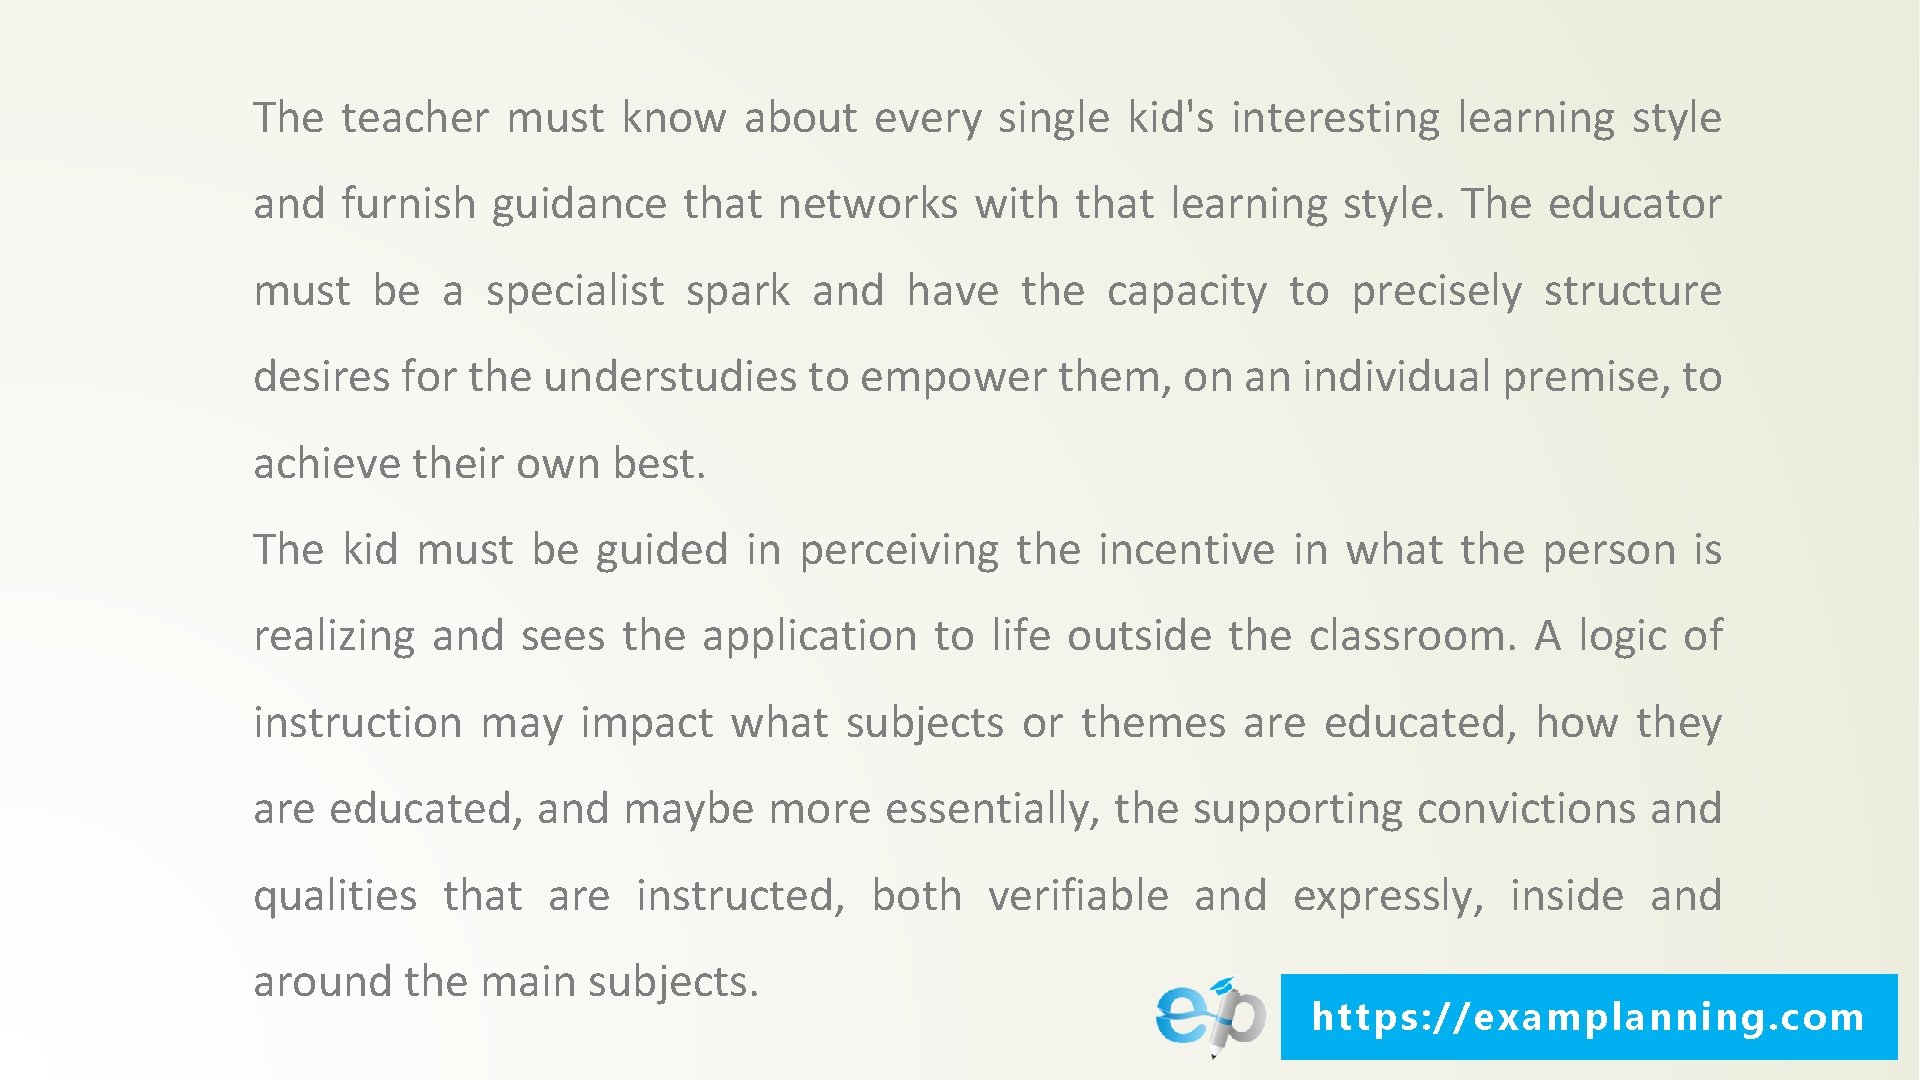 The teacher must know about every single kid's interesting learning style and furnish guidance